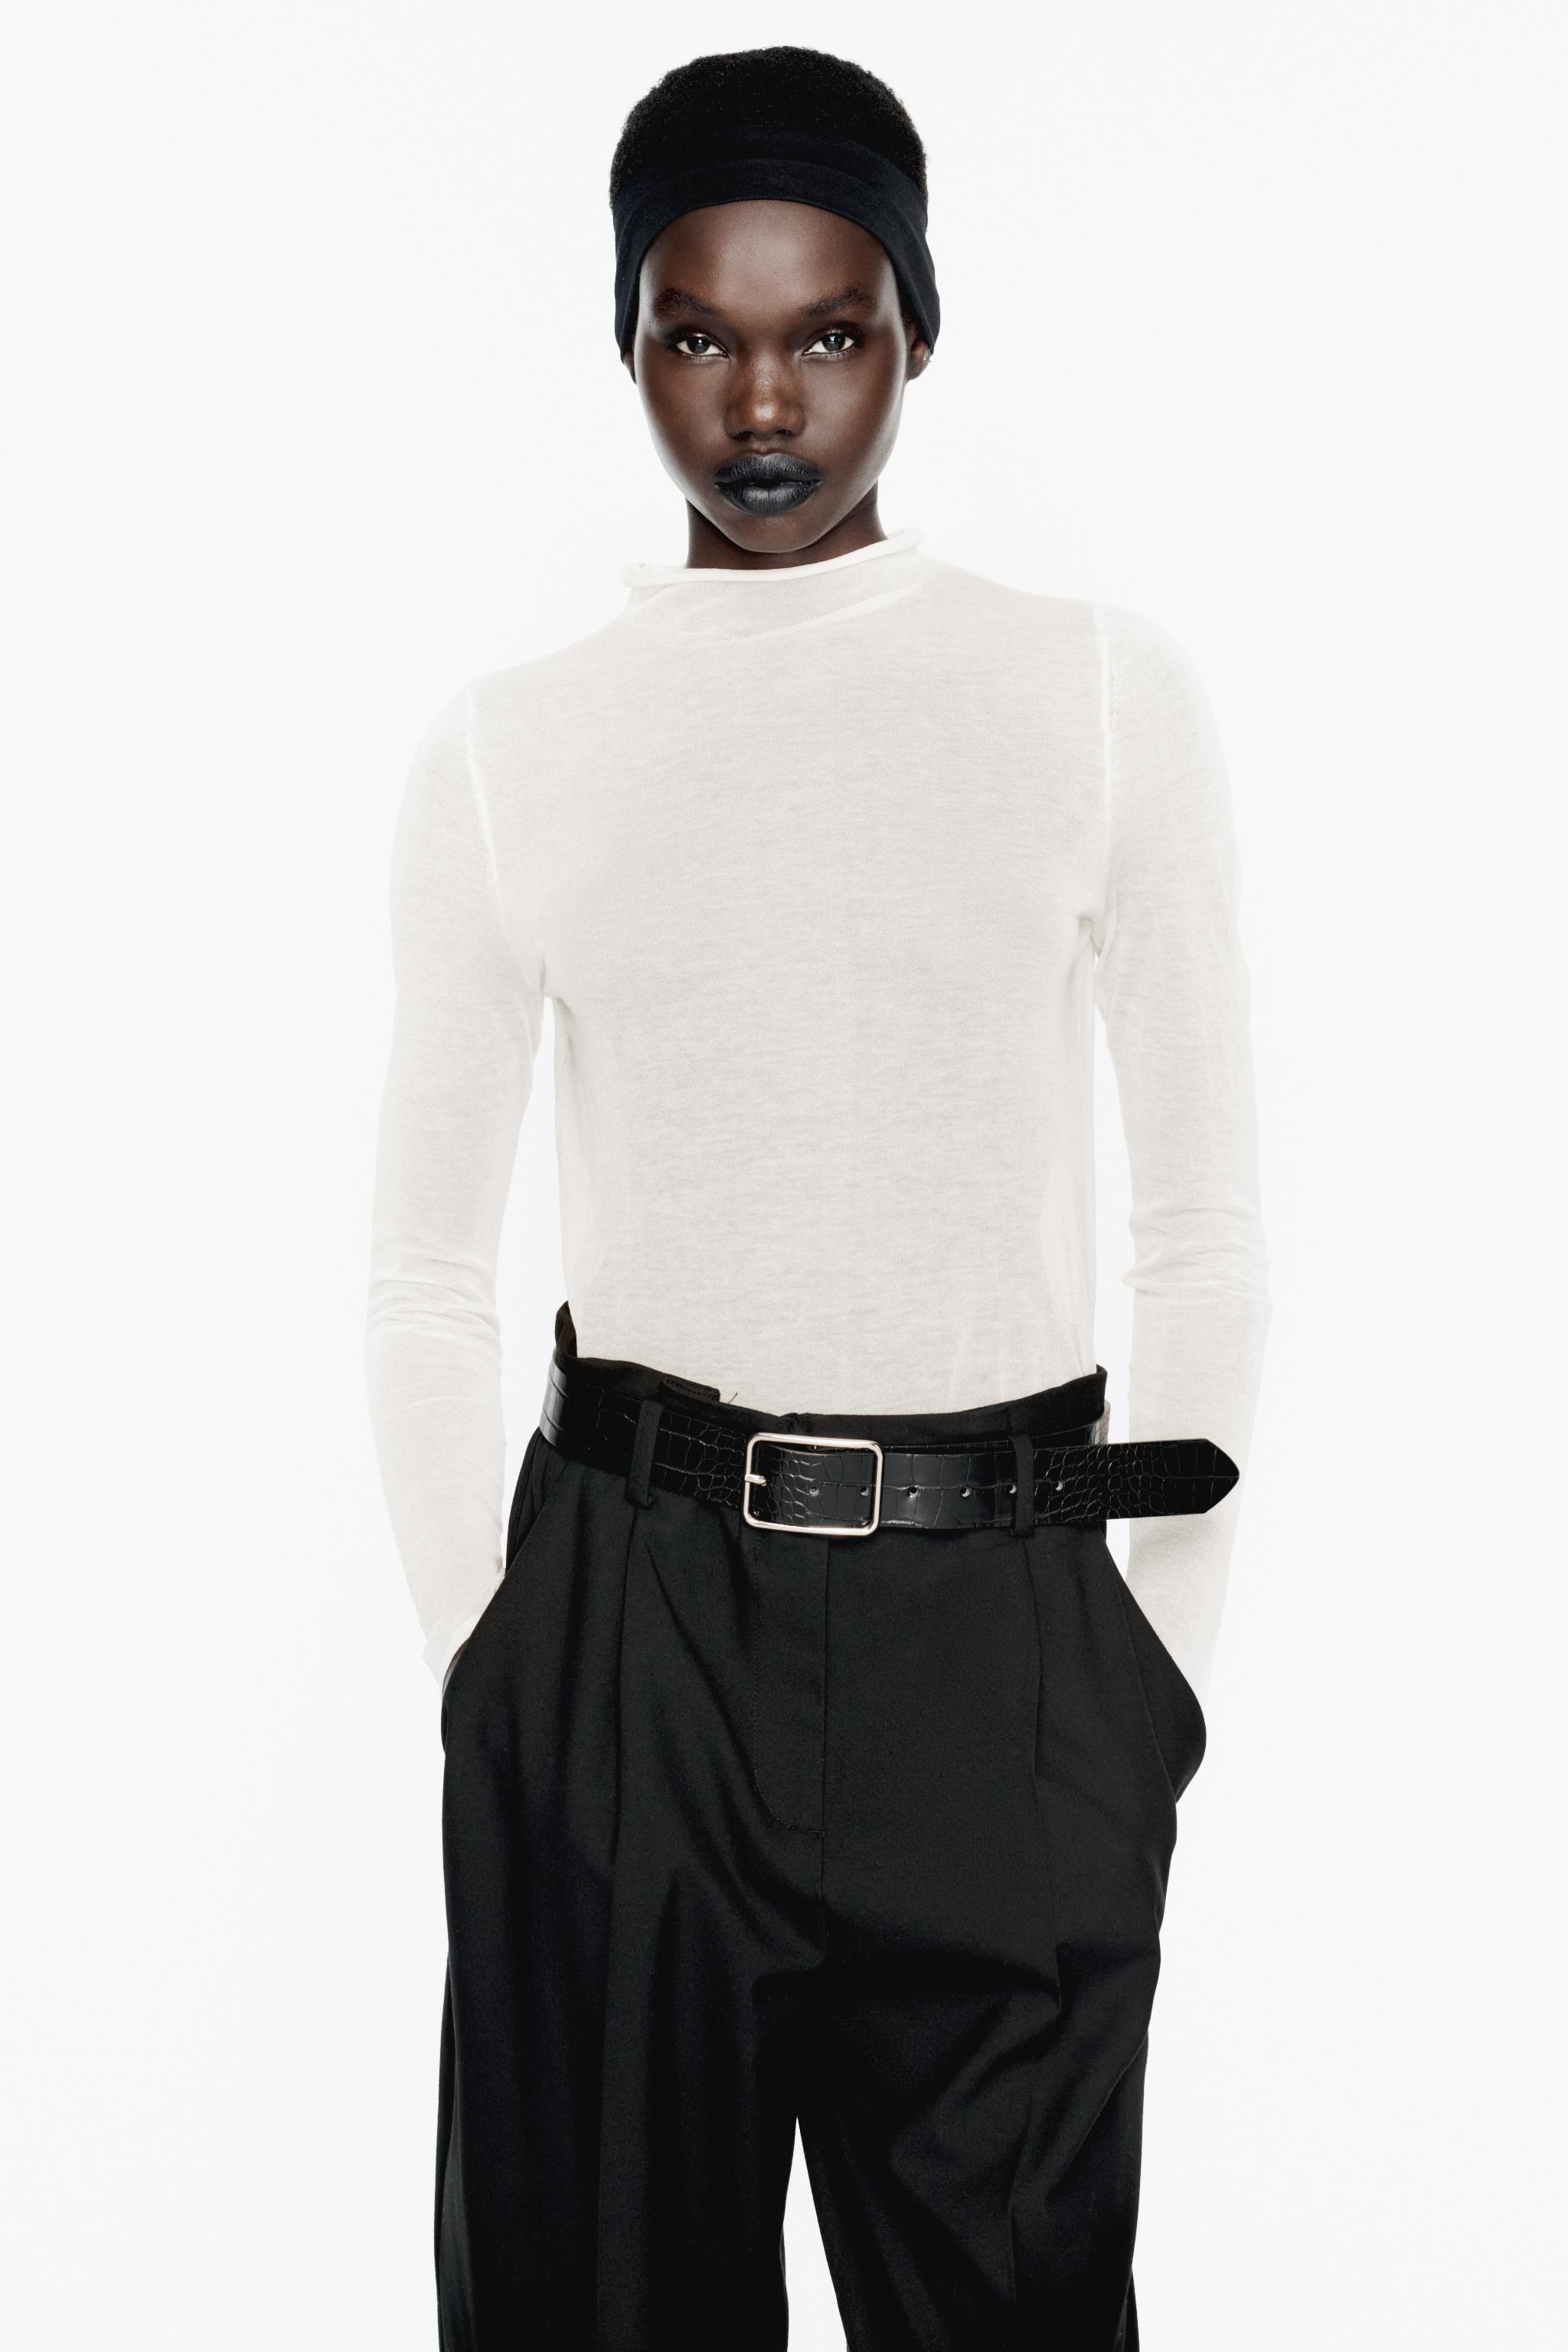 BELTED TAPERED PANTS